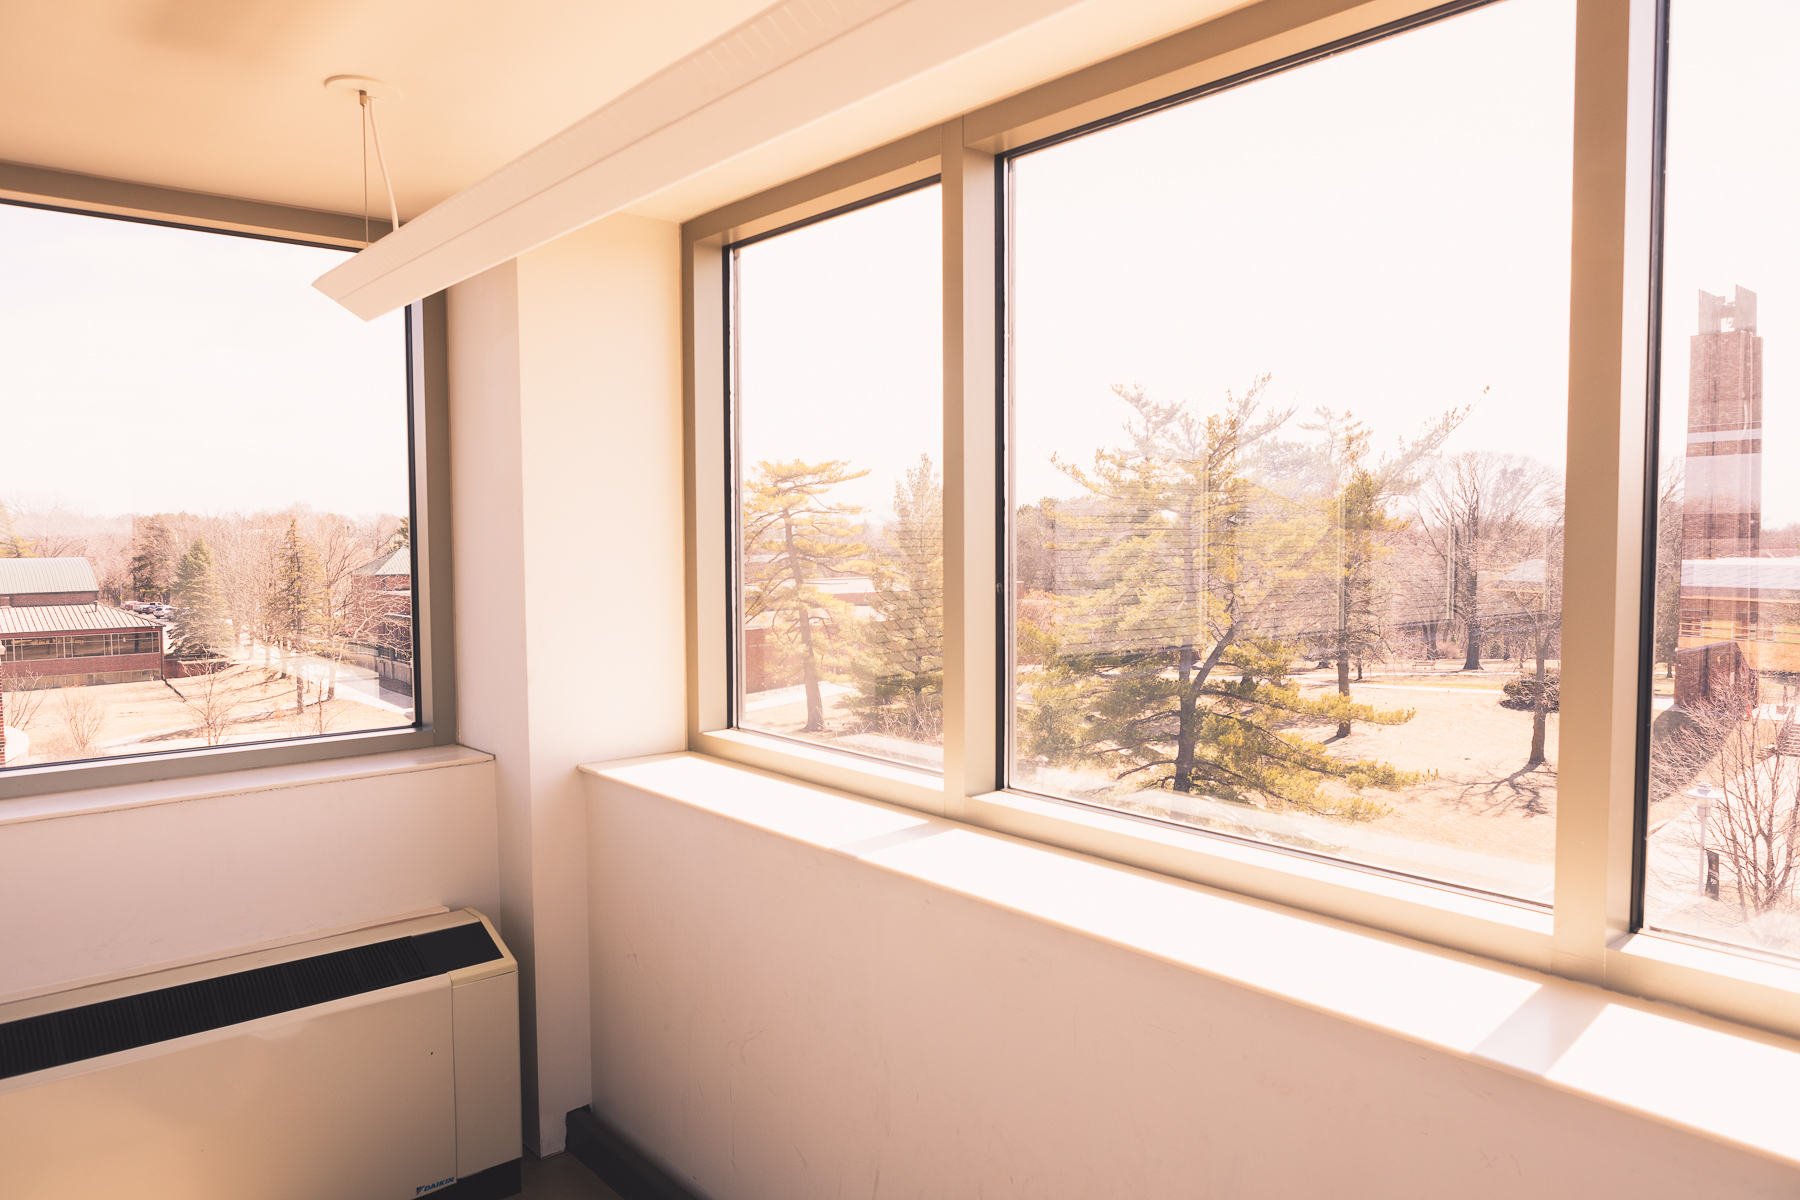 From the fourth floor of Art/Ed, much of Doane's campus can be seen from its nearly 360 degree view windows. The image looks out over Merrill Tower, Padour Walker, Perry Campus Center and Butler Gymnasium.